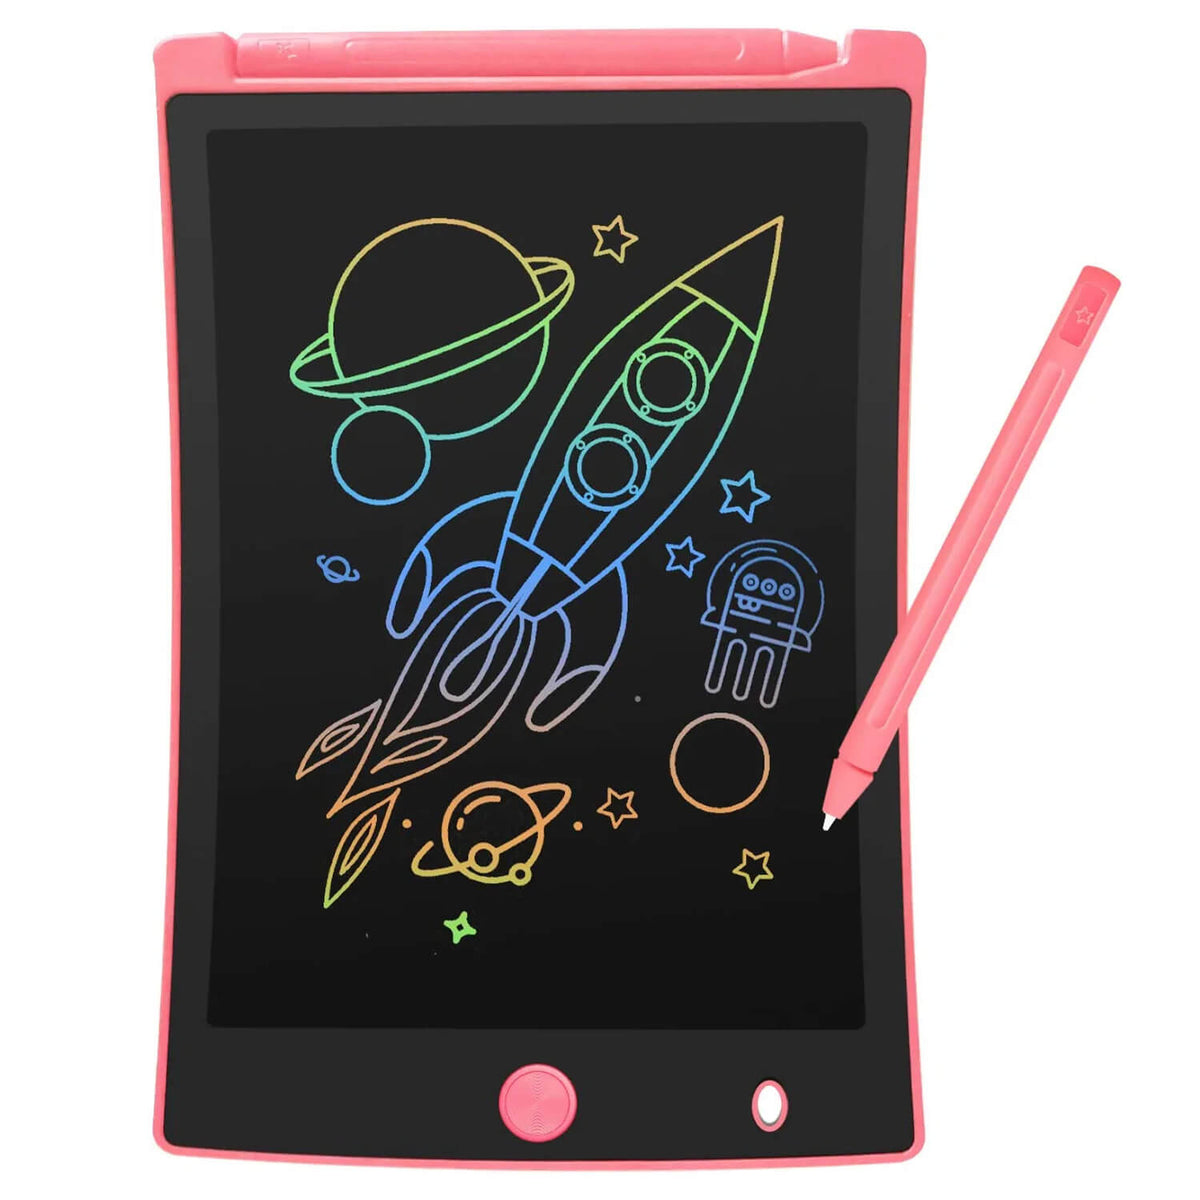 ORSEN Colorful 8.5 Inch LCD Writing Tablet for Kids, Electronic Sketch Drawing Pad Doodle Board